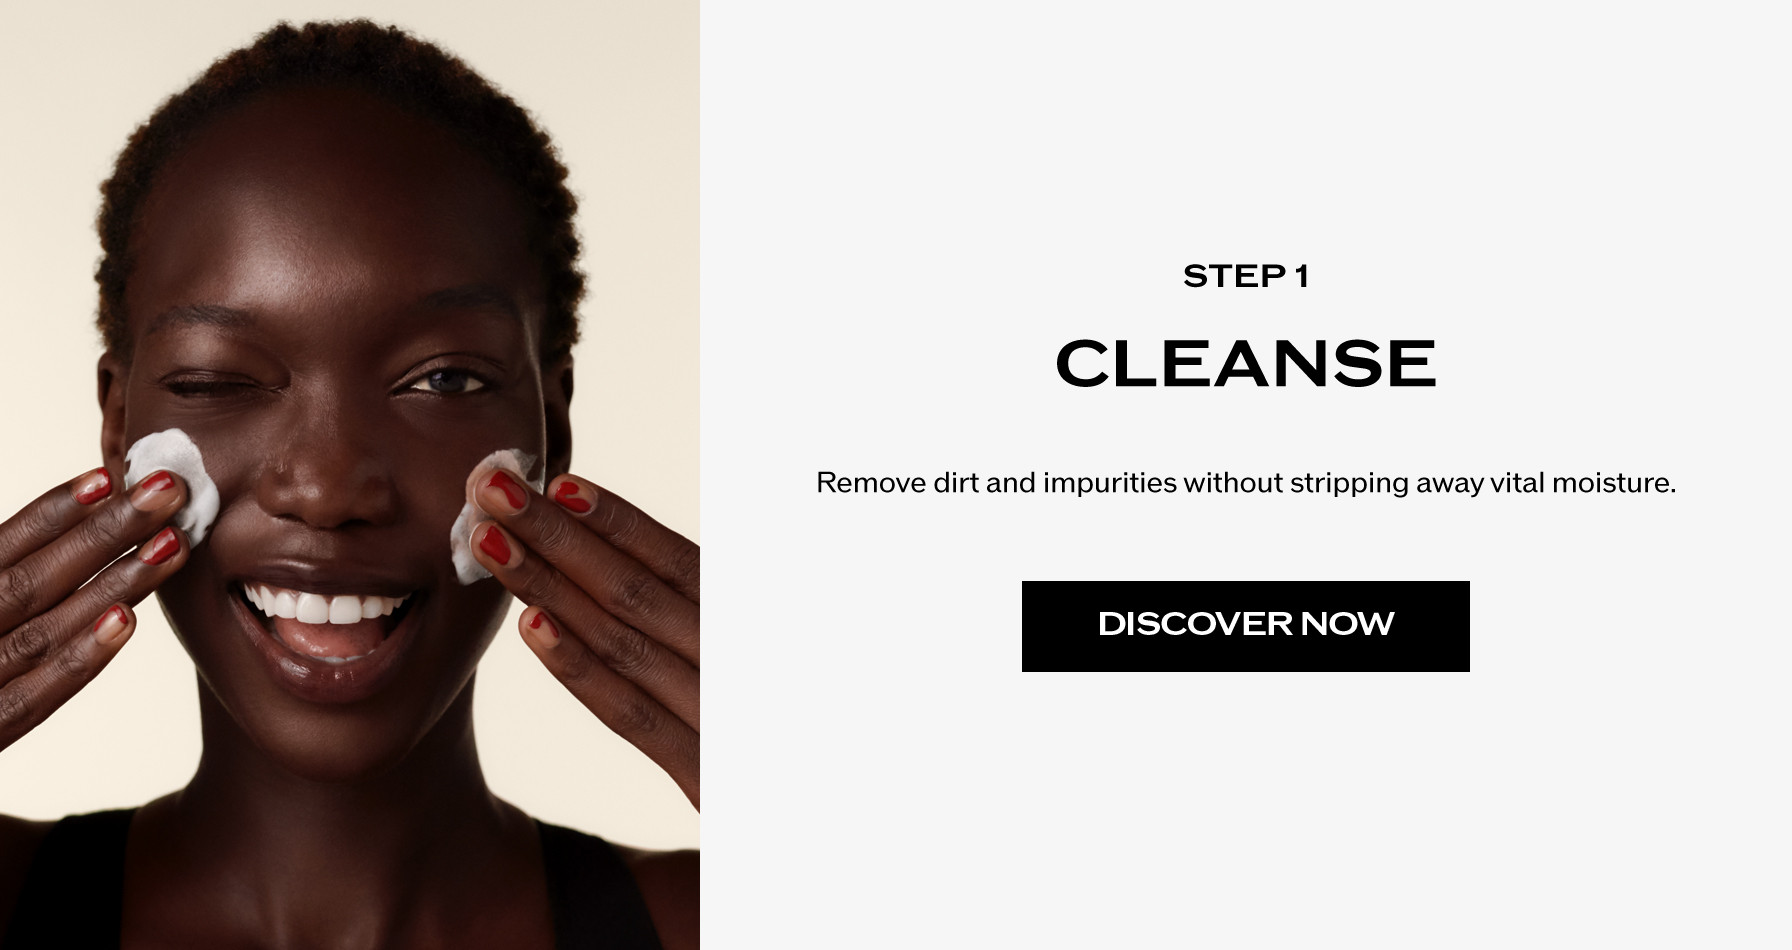 Step 1: Cleanse. Remove dirt and impurities without stripping away vital moisture.